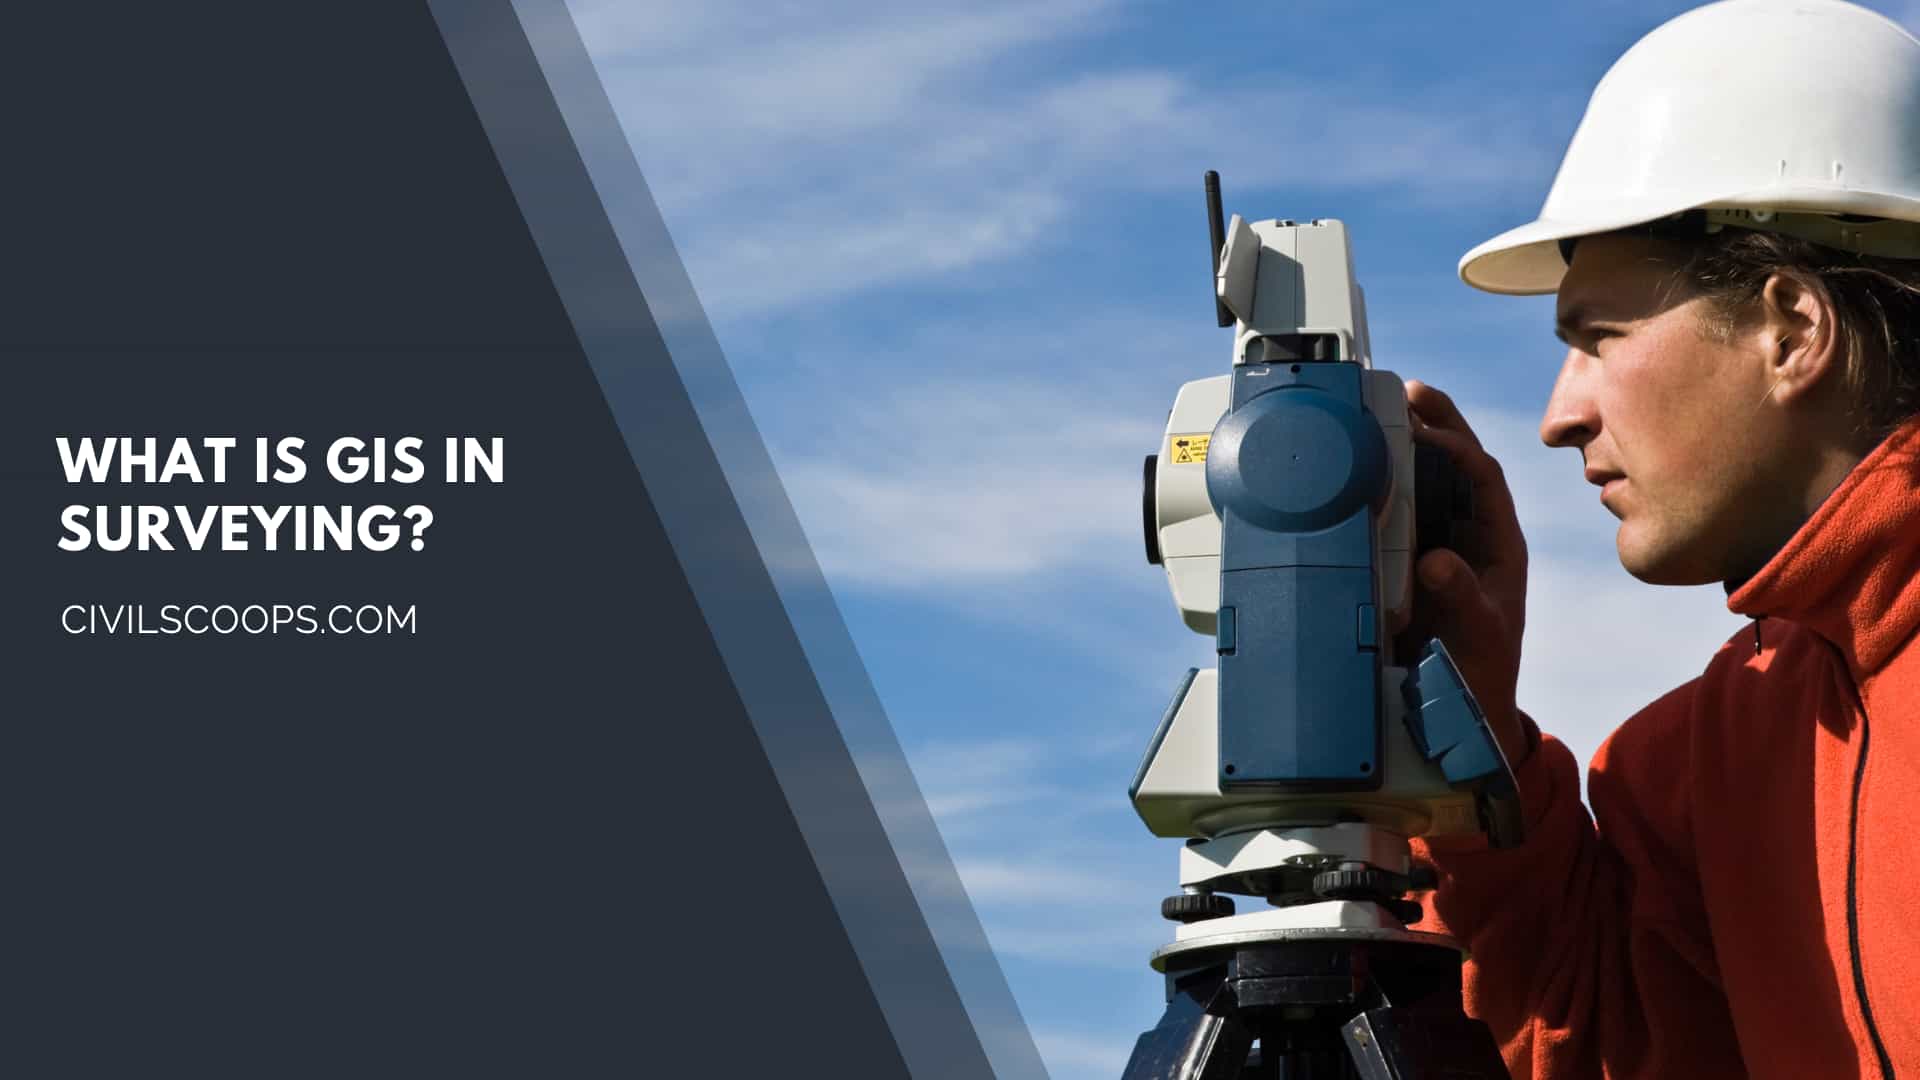 What Is GIS In Surveying?